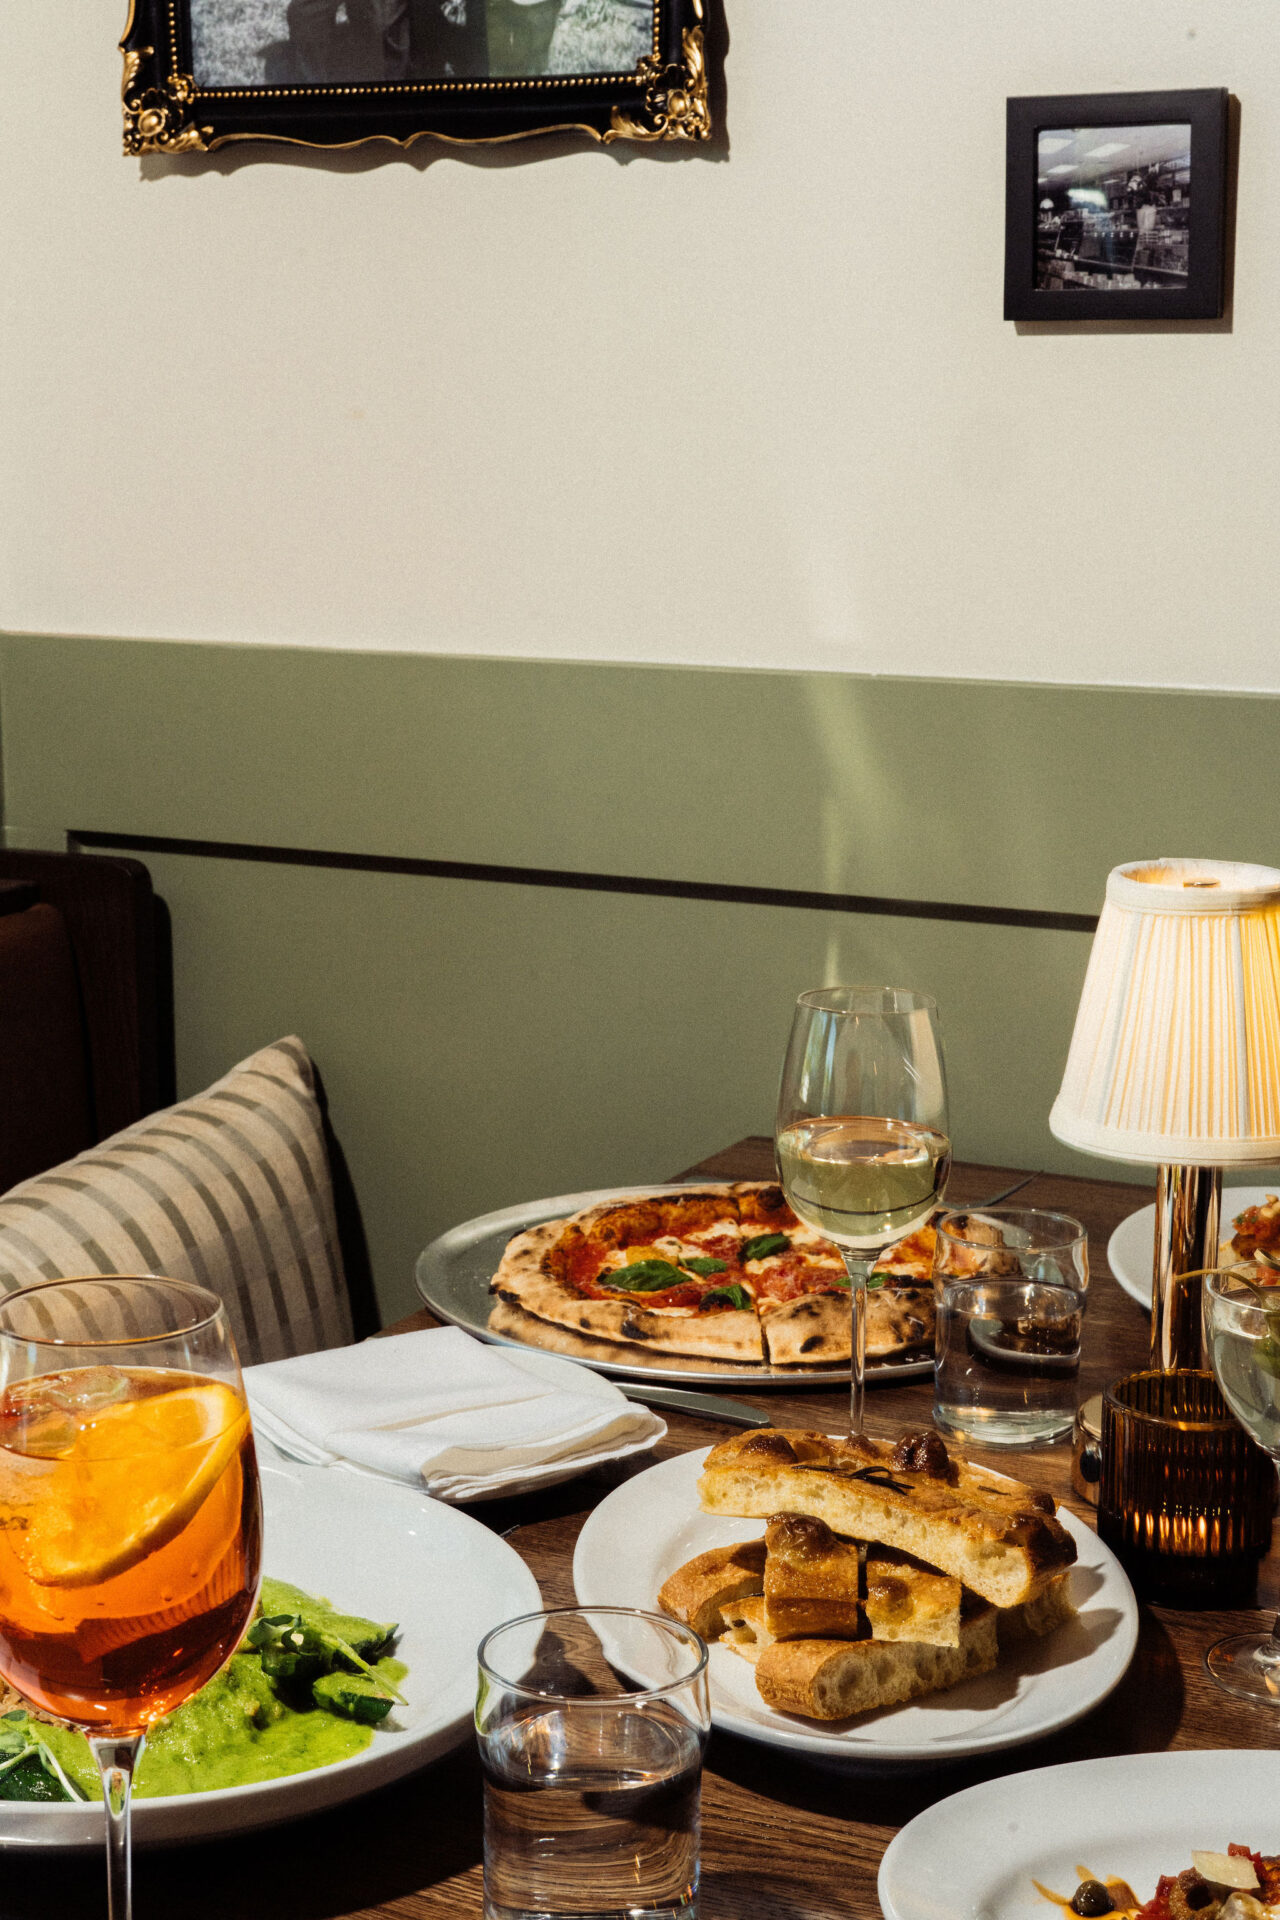 A table spread with pizzas, salad, and aperol spritzes joelle 